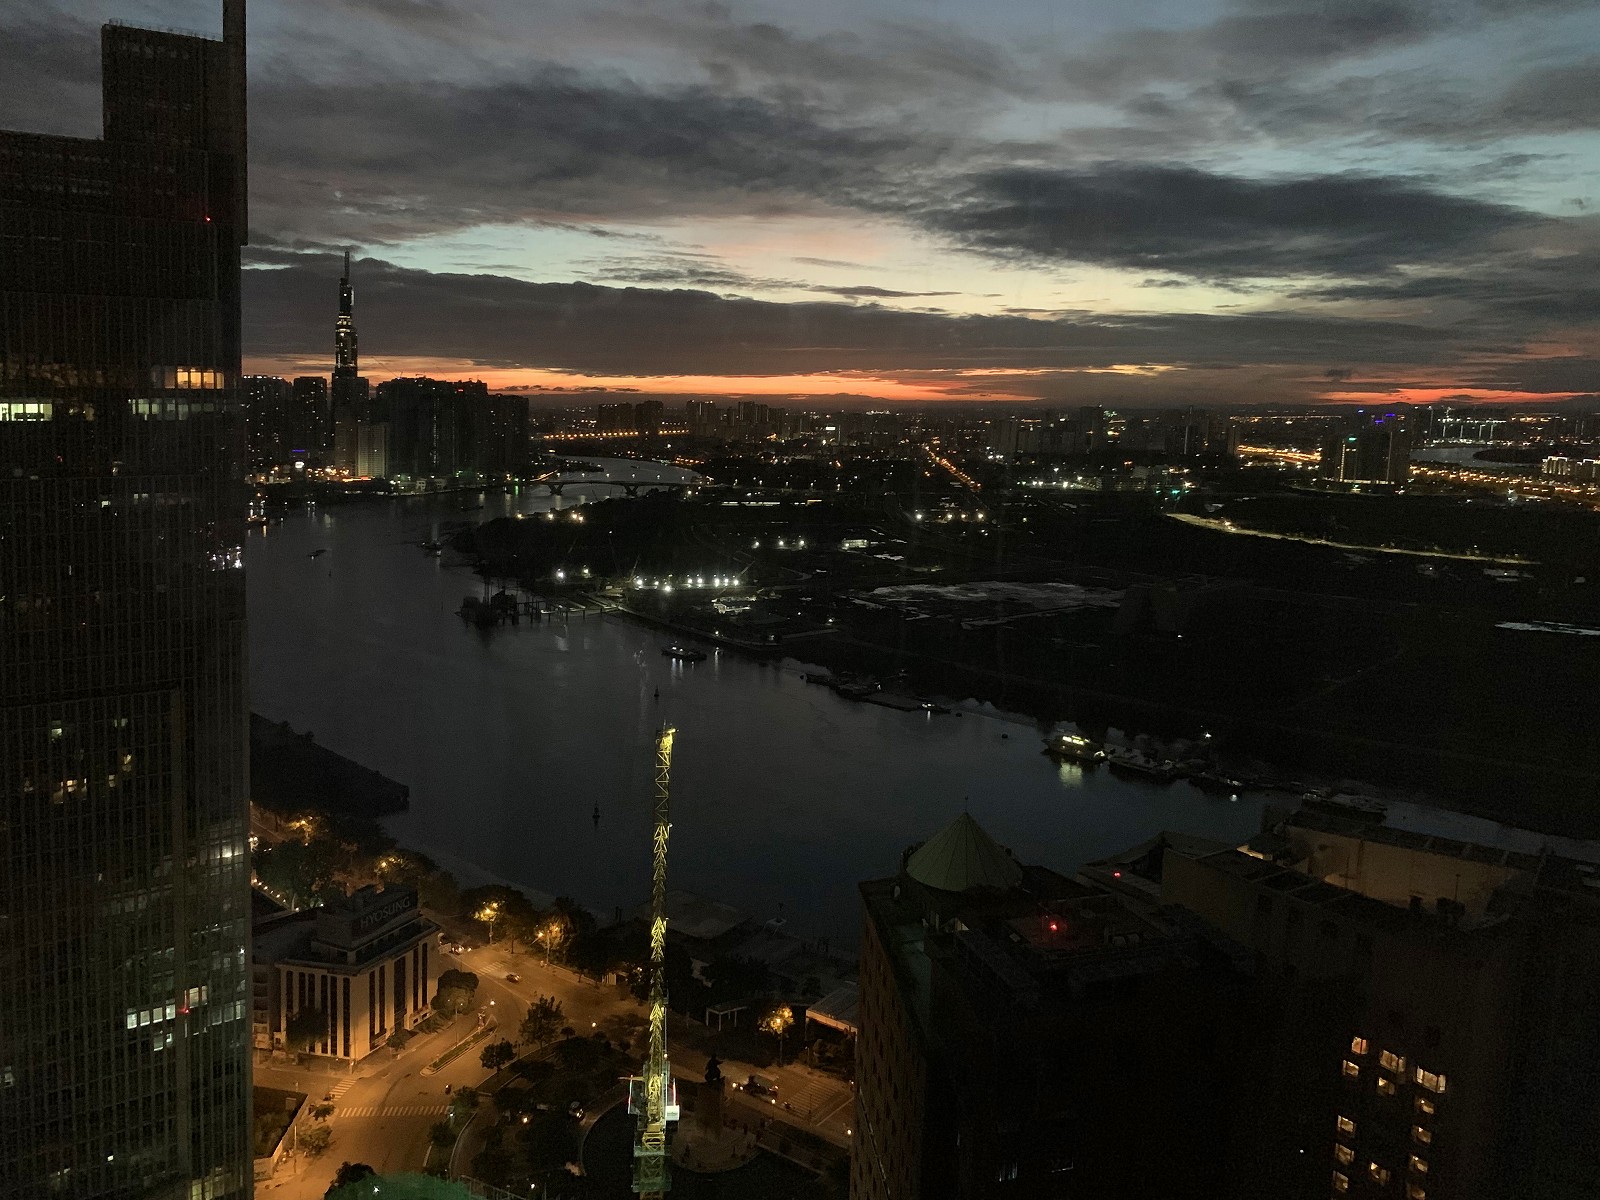 Sunrise at The Reverie Saigon (Panorama Deluxe)